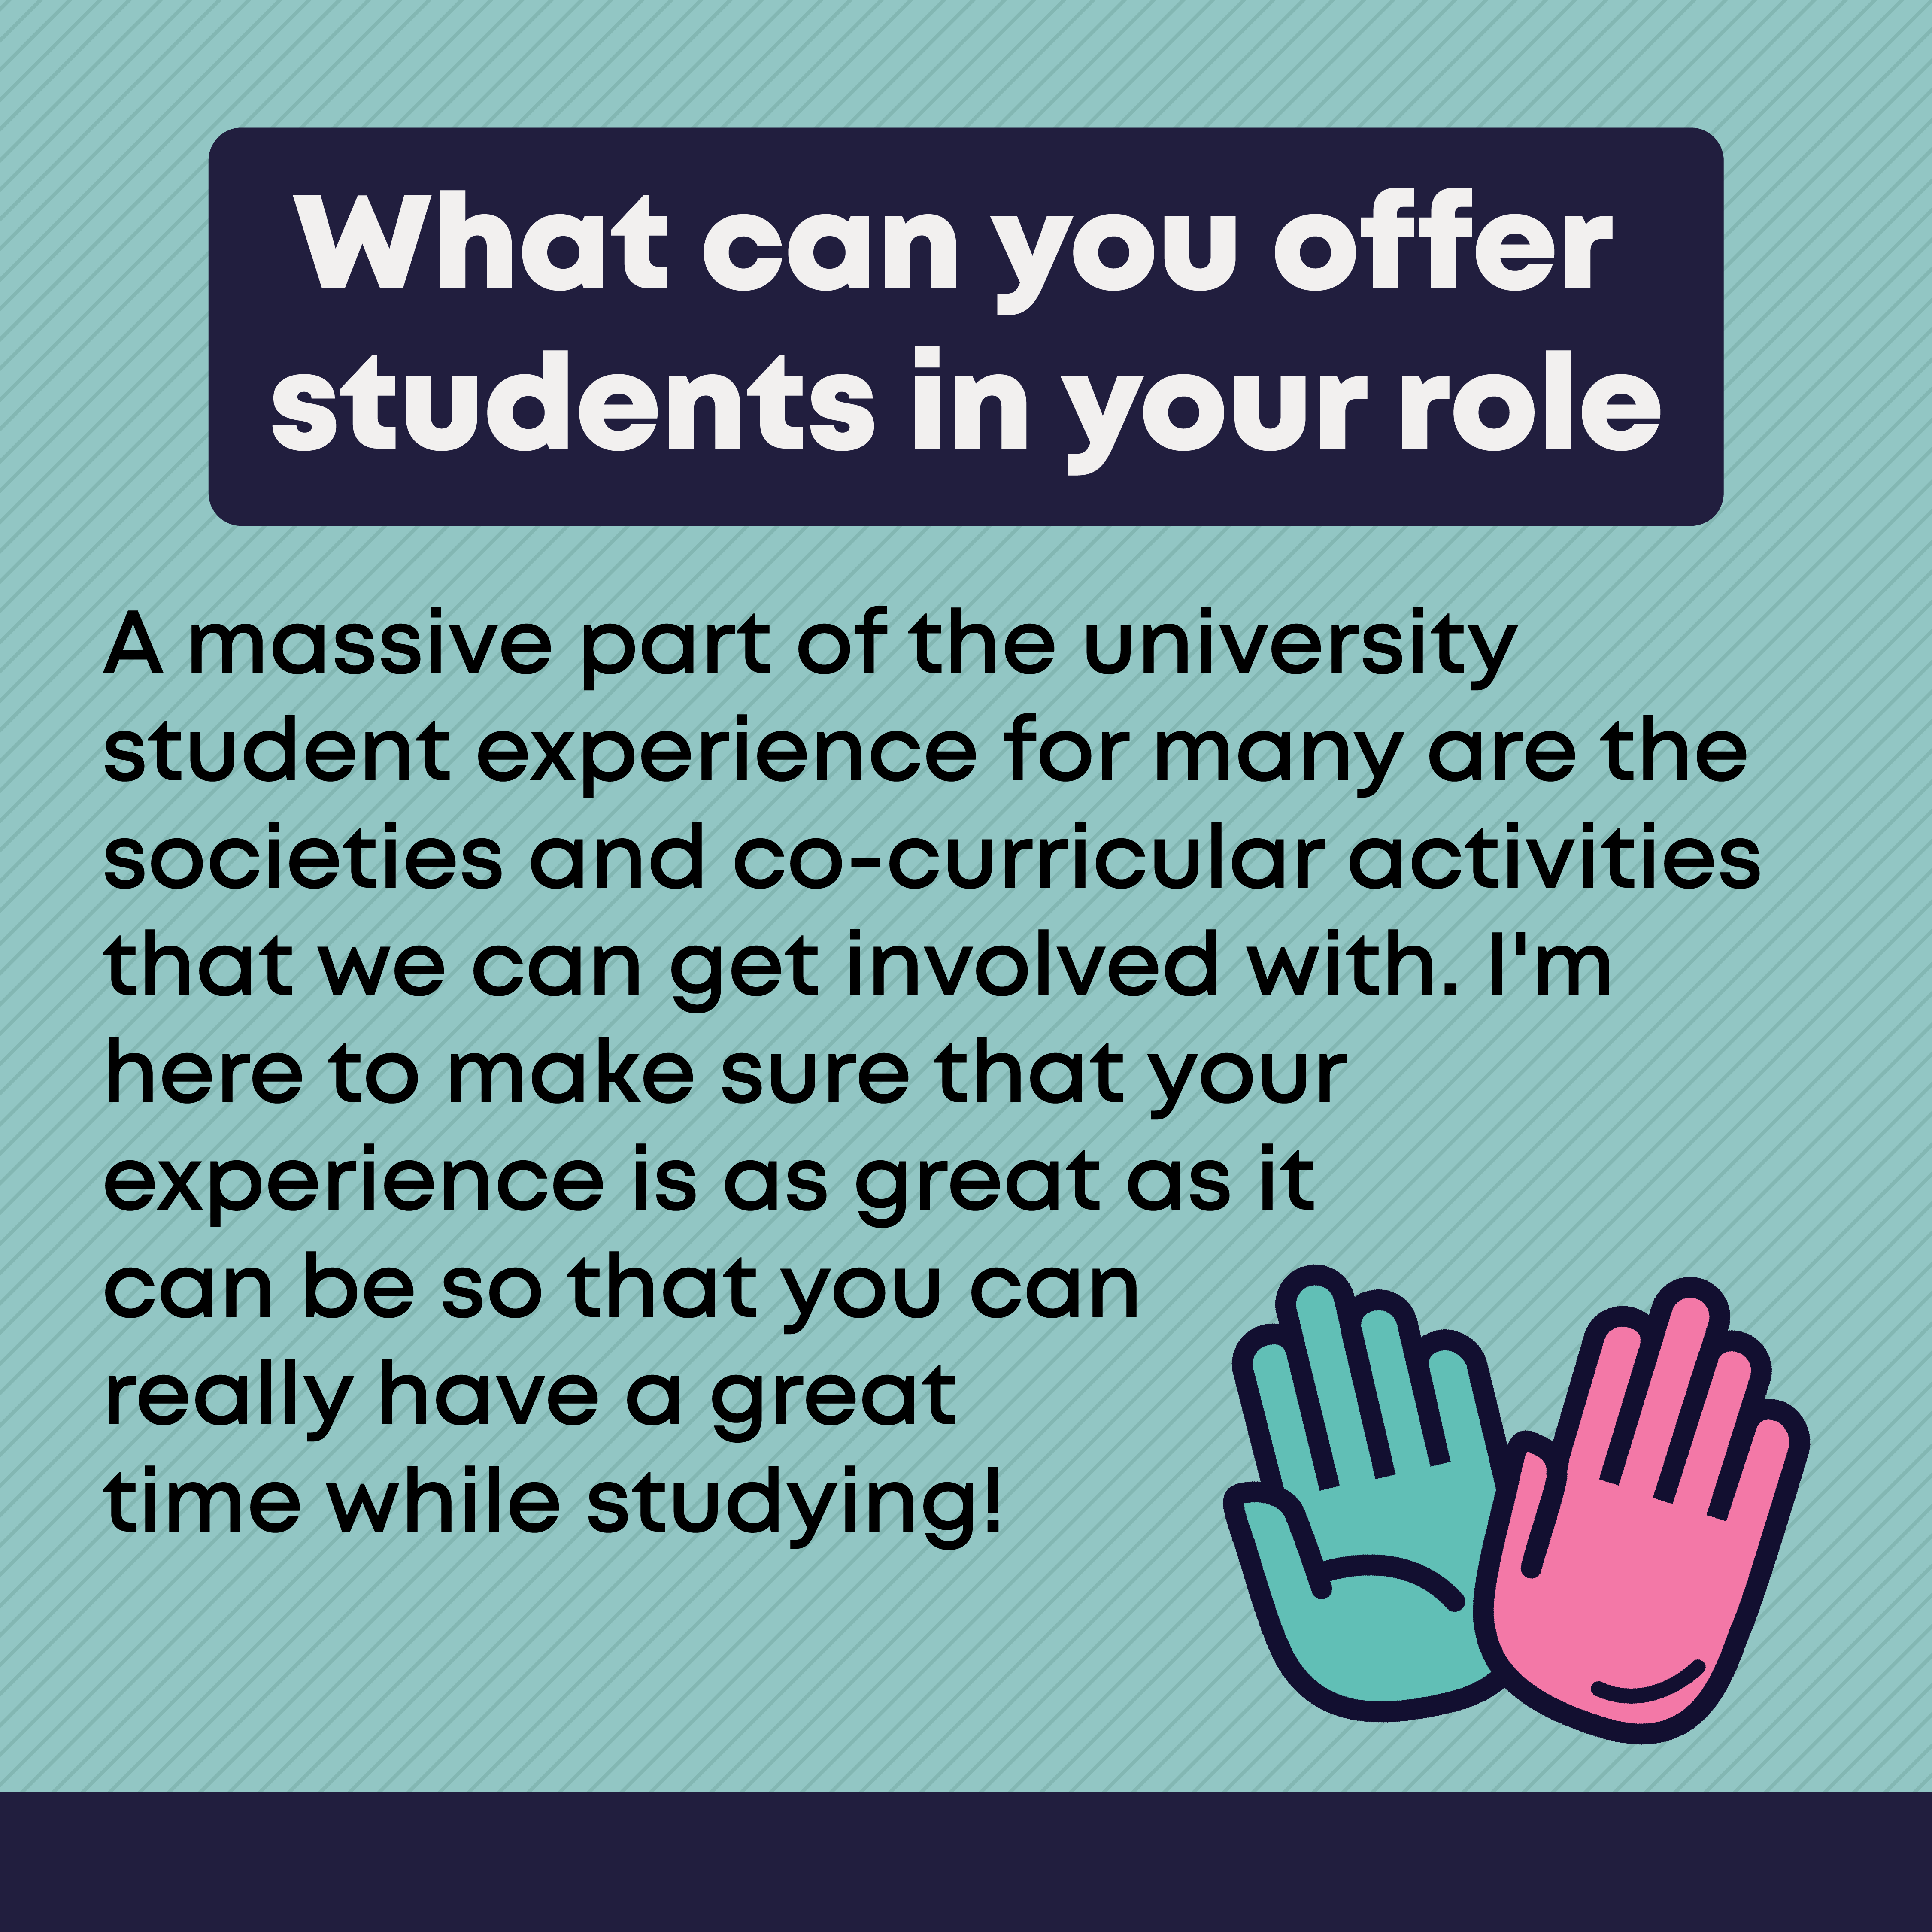 What can you offer students in your role?    A massive part of the university student experience for many are the societies and co-curricular activities that we can get involved with. I'm here to make sure that your experience is as great as it can be so that you can really have a great time while studying!